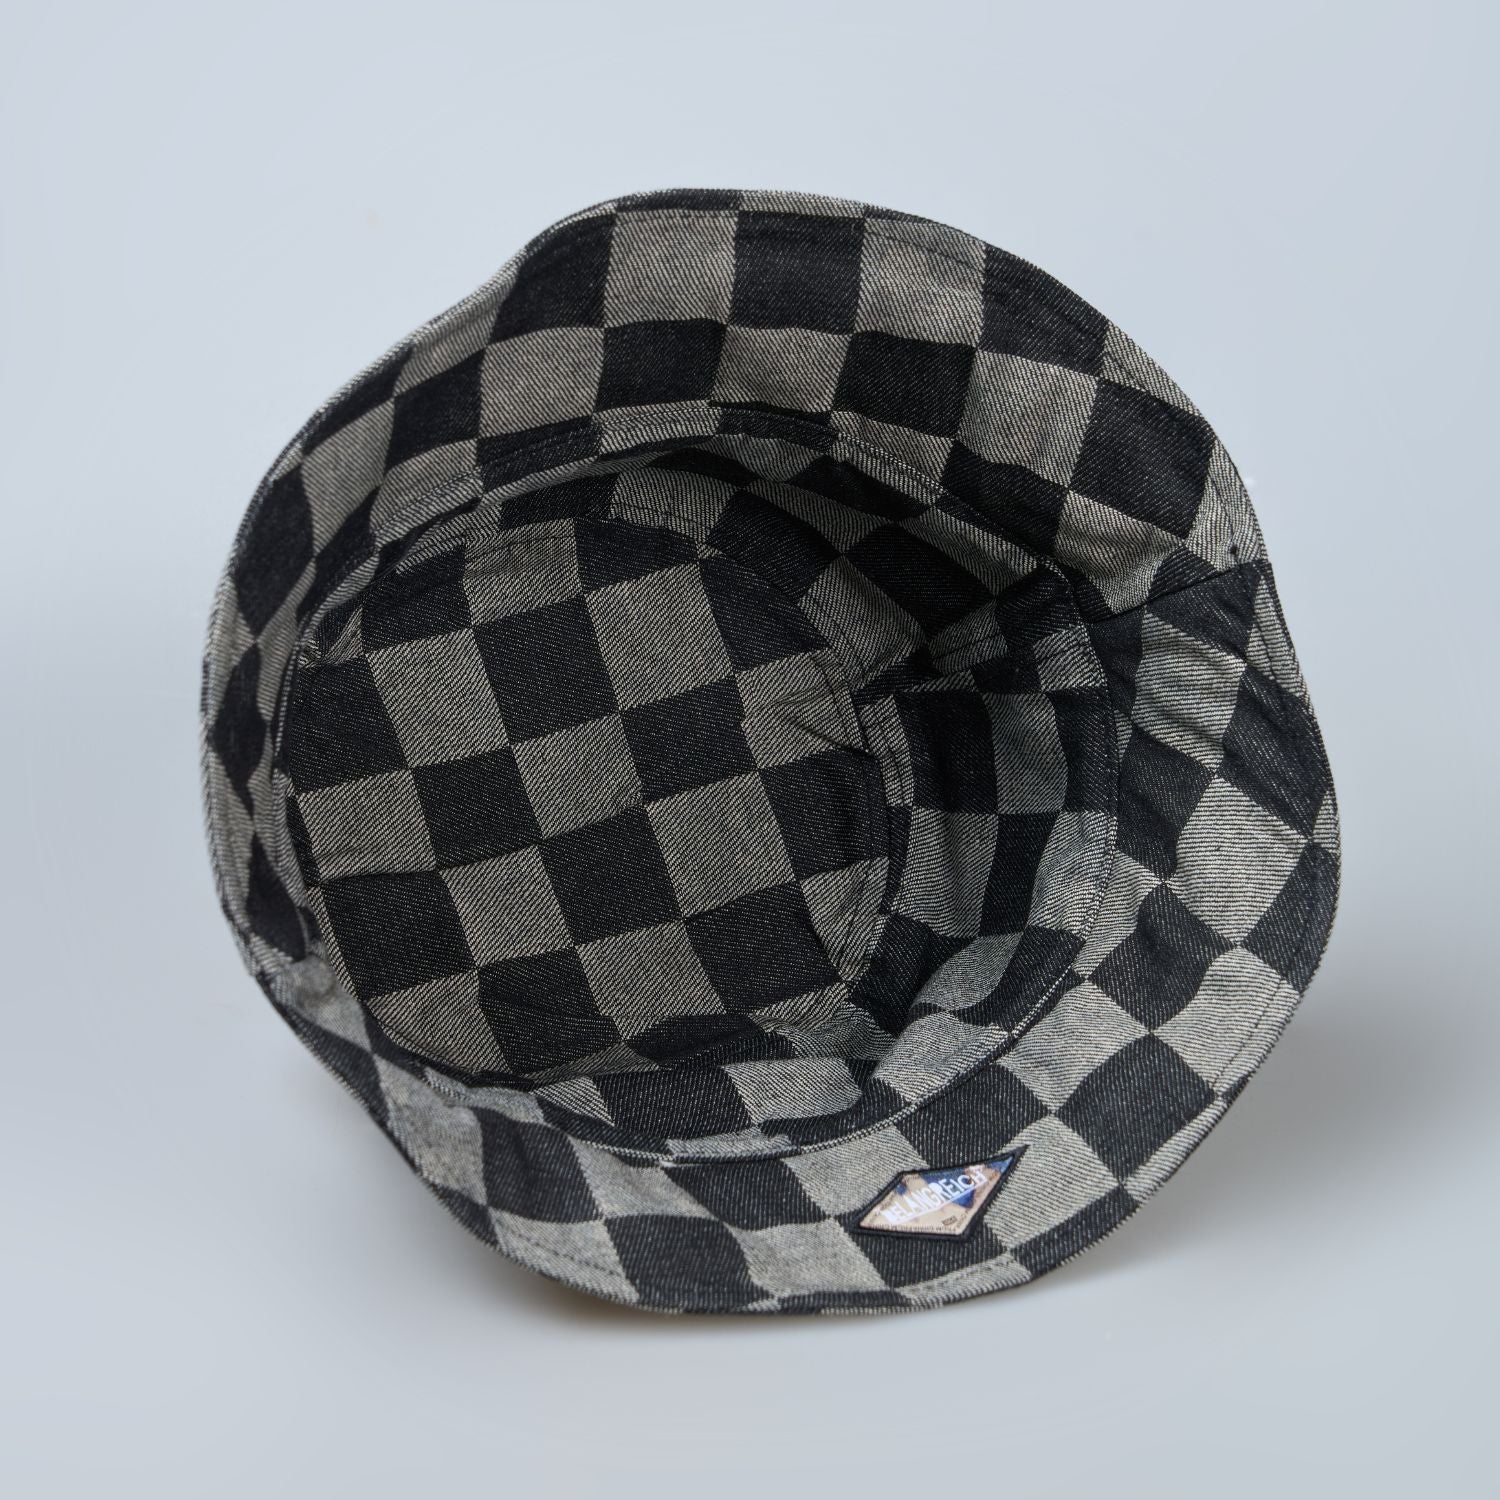 Black colored, chequered pattern, lightweight bucket hat for men, inside view.